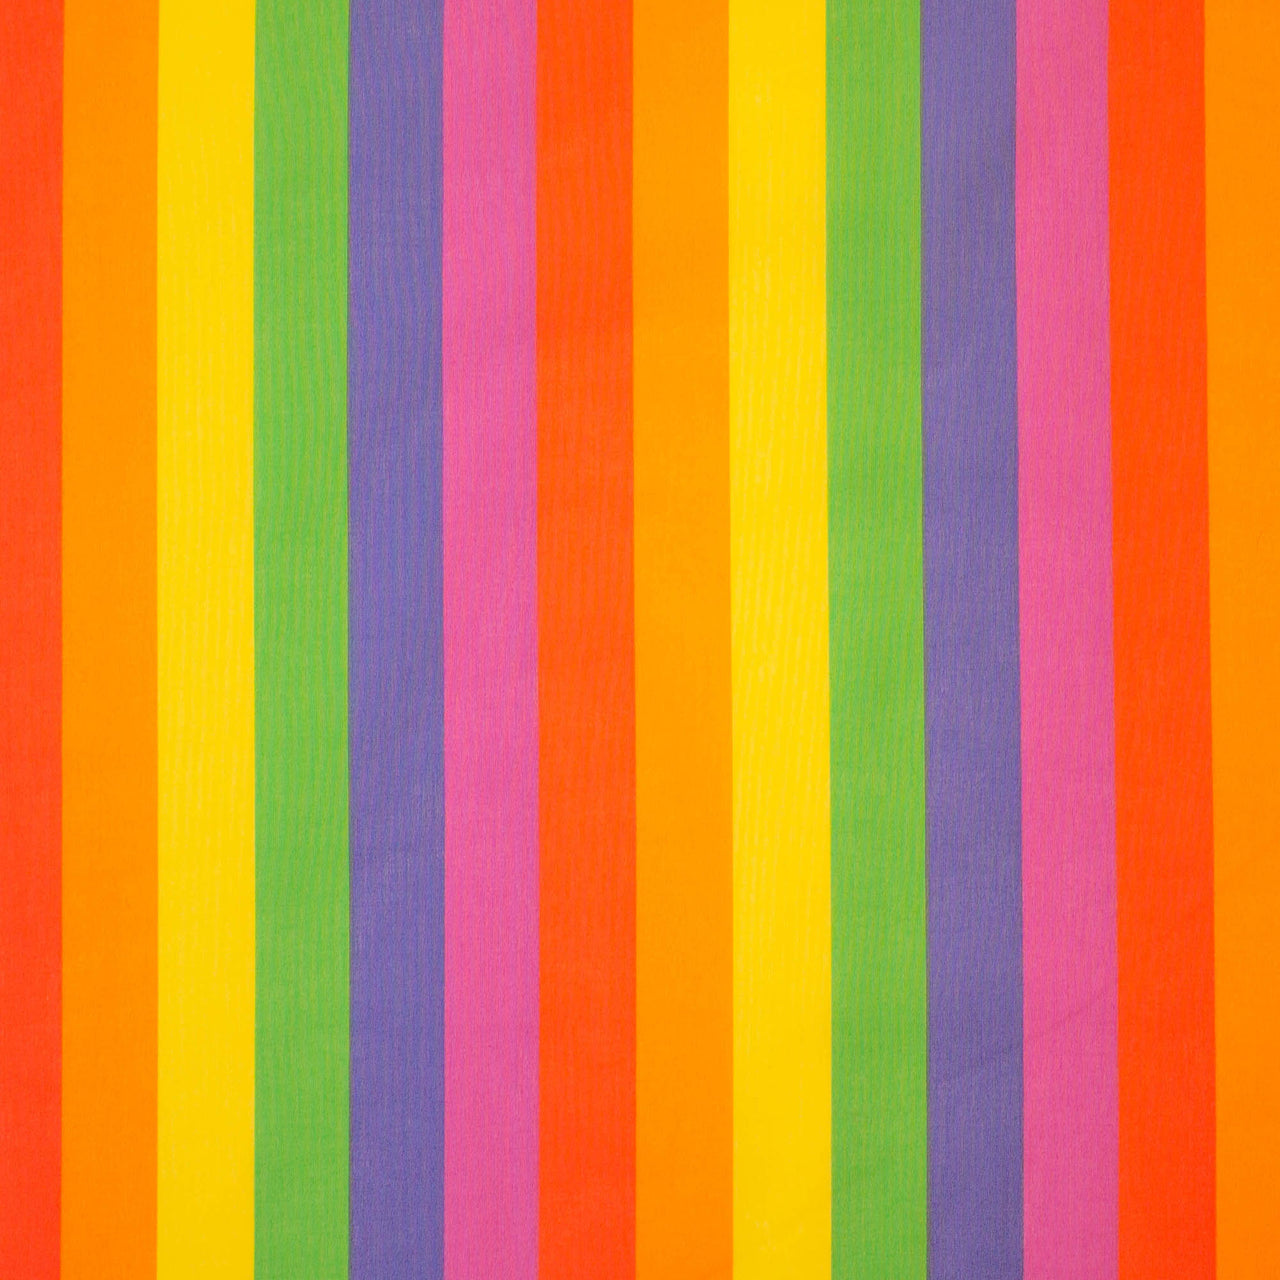 Rainbow Stripes 27 mm Wide on Printed Poly Cotton Fabric ideal for Pride & Learn